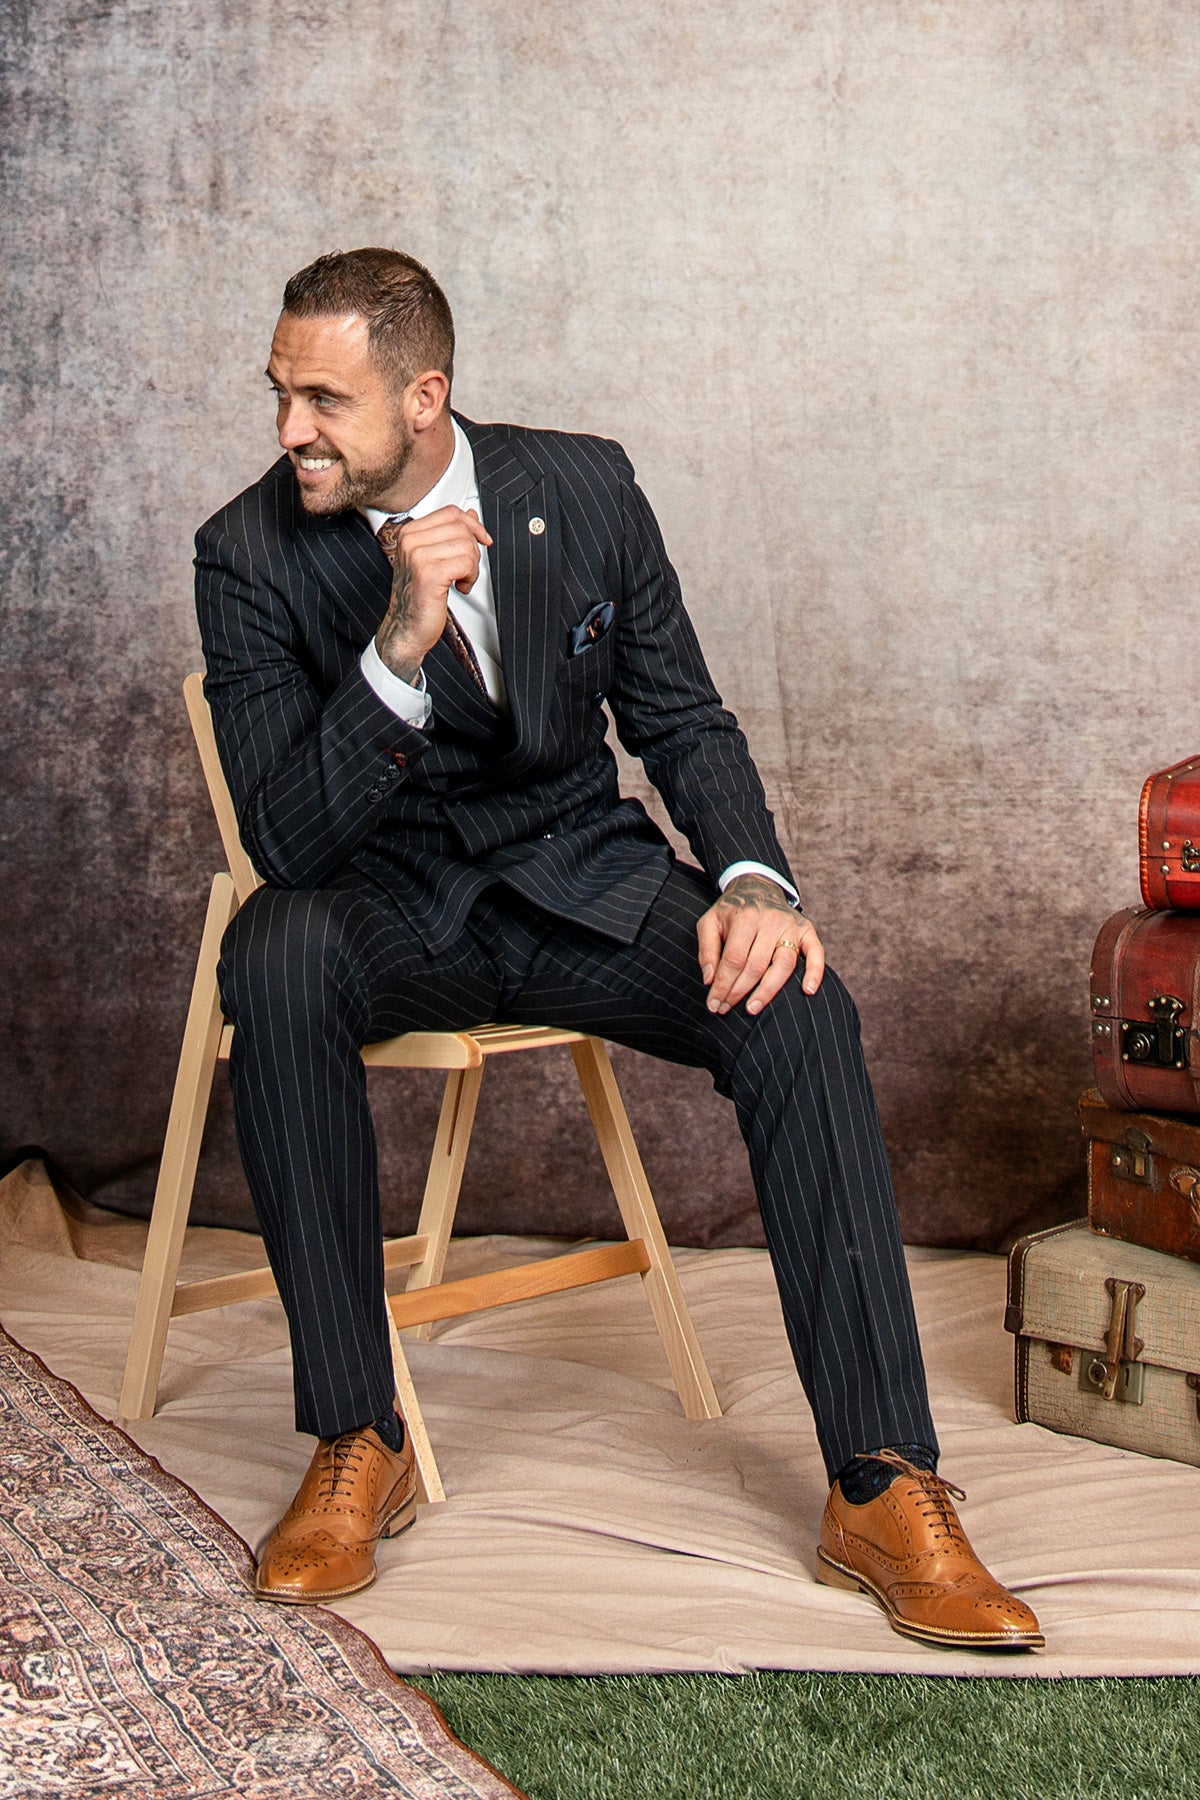 The WHU Collection - ROCCO Navy Pinstripe Double Breasted Suit As Worn By Danny Ings